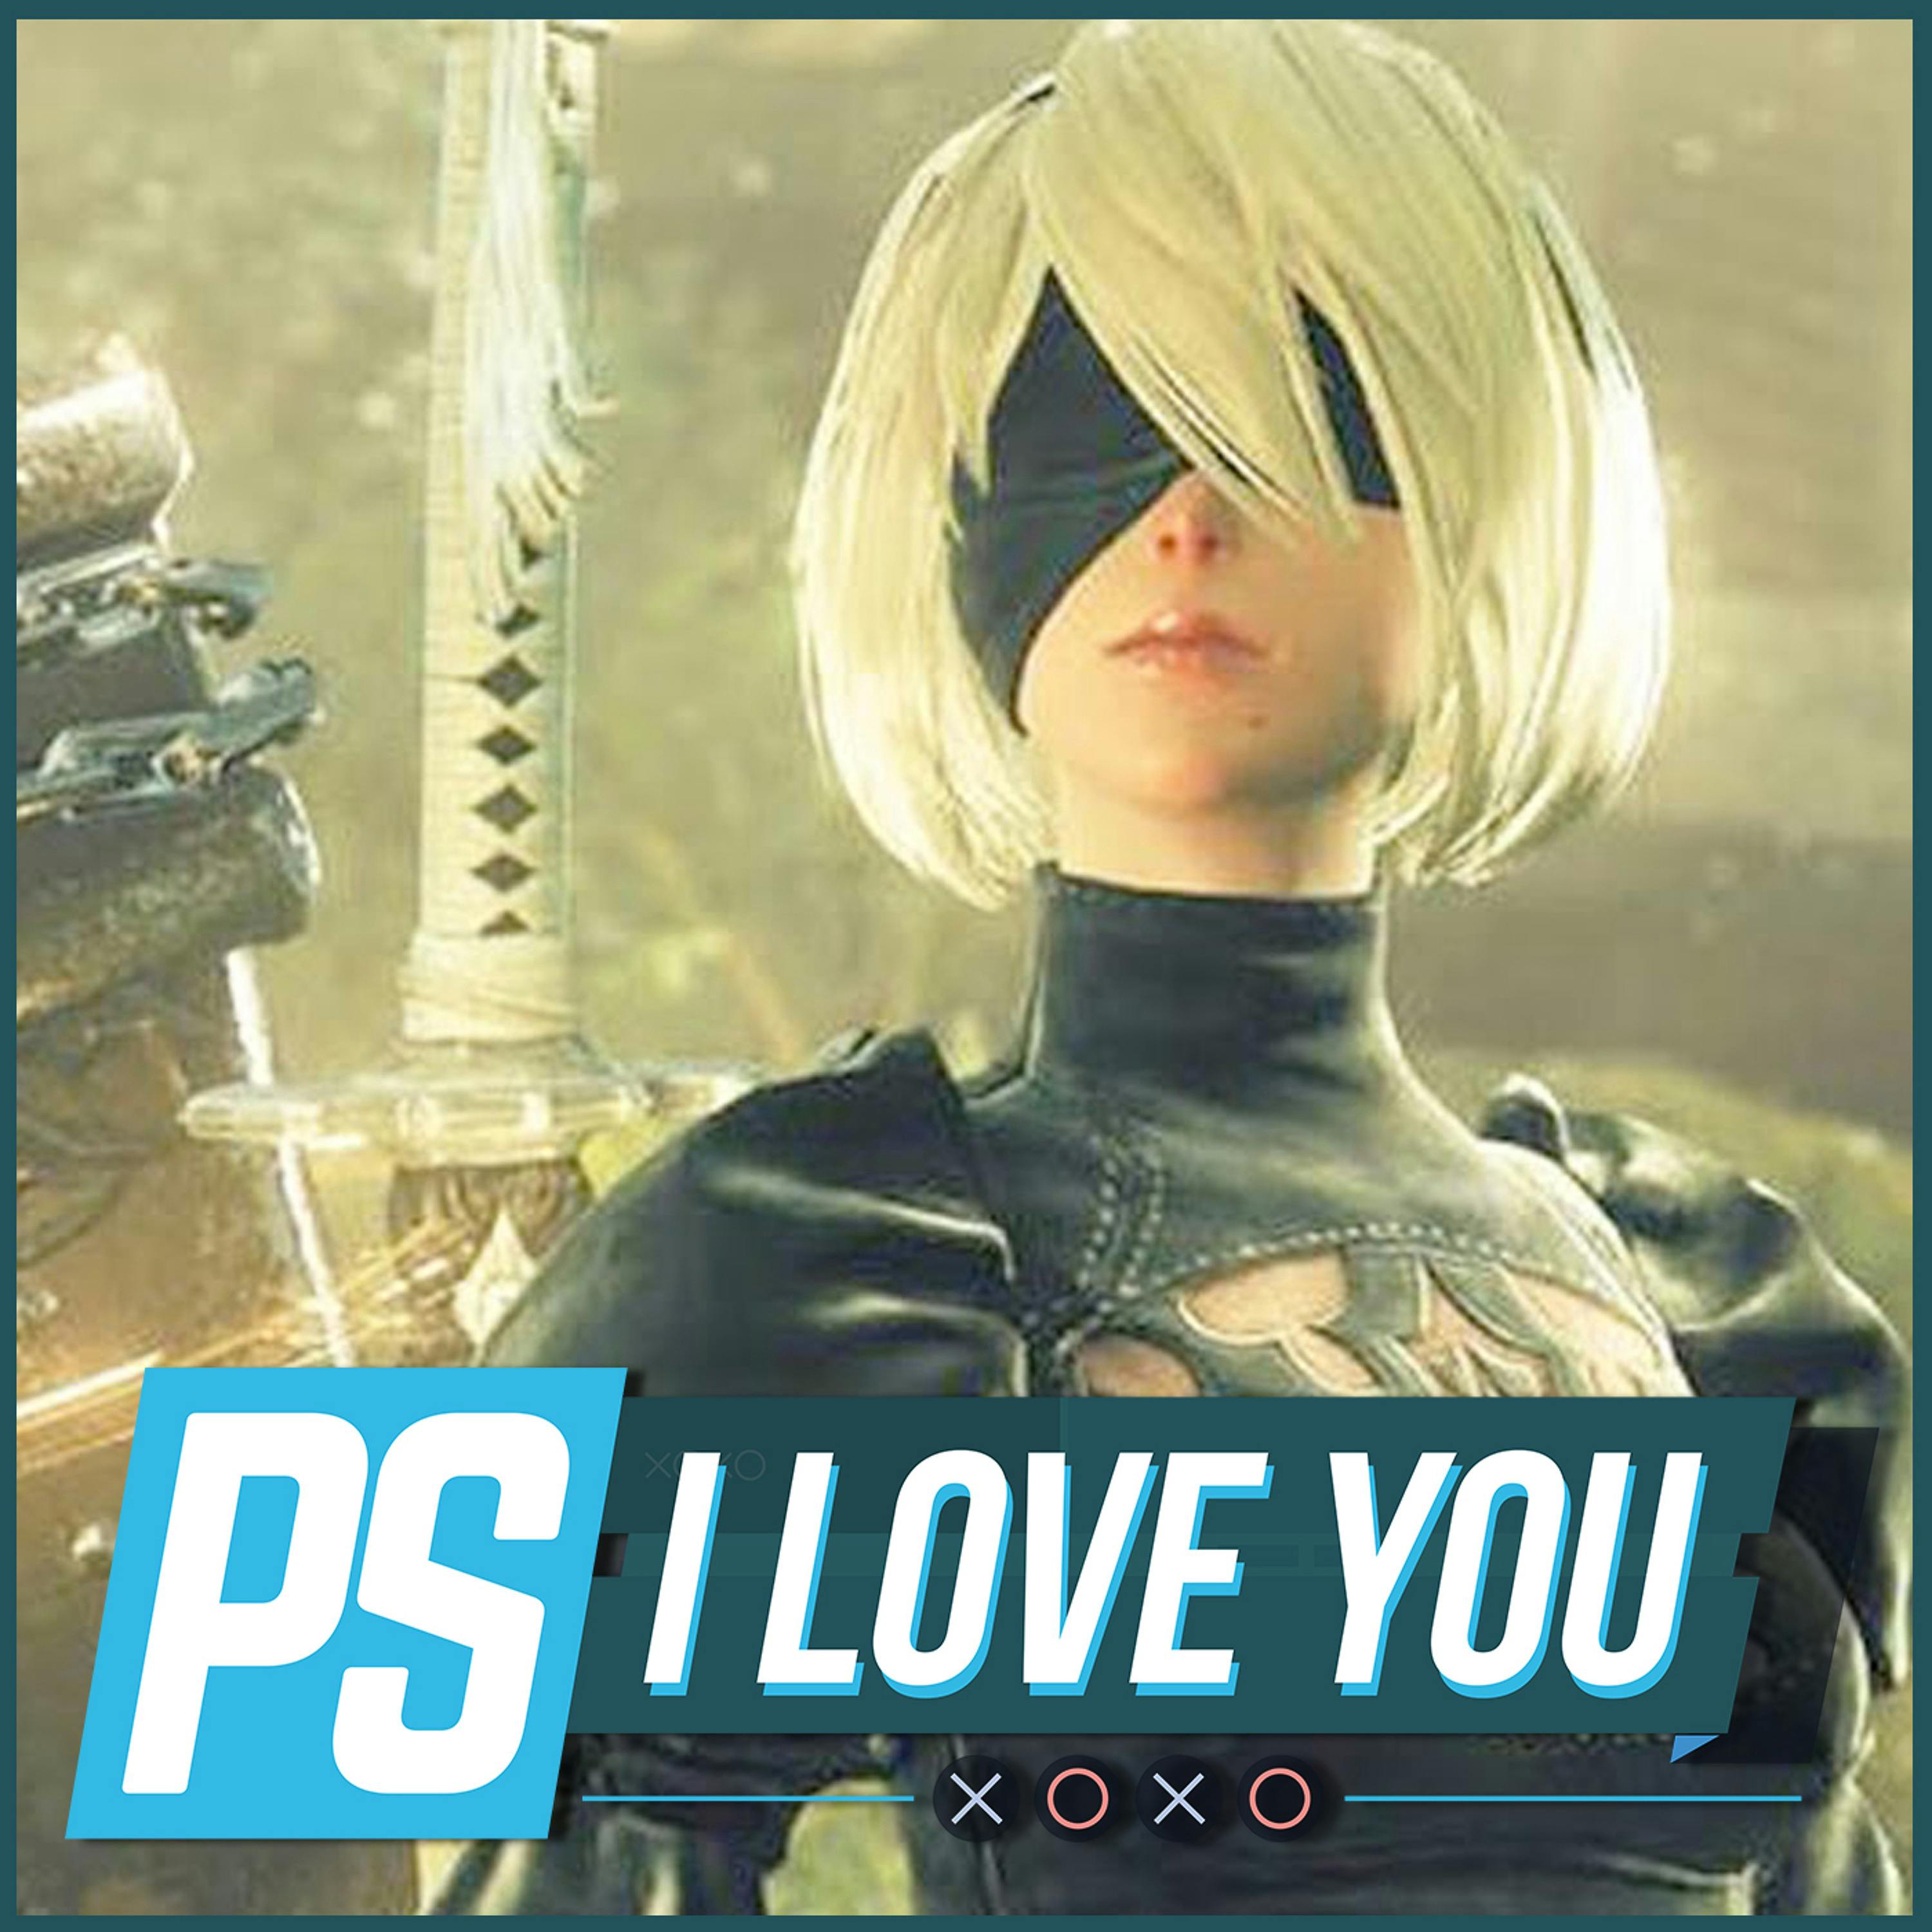 Would You Pay for PSN Trophies? - PS I Love You XOXO Ep. 76